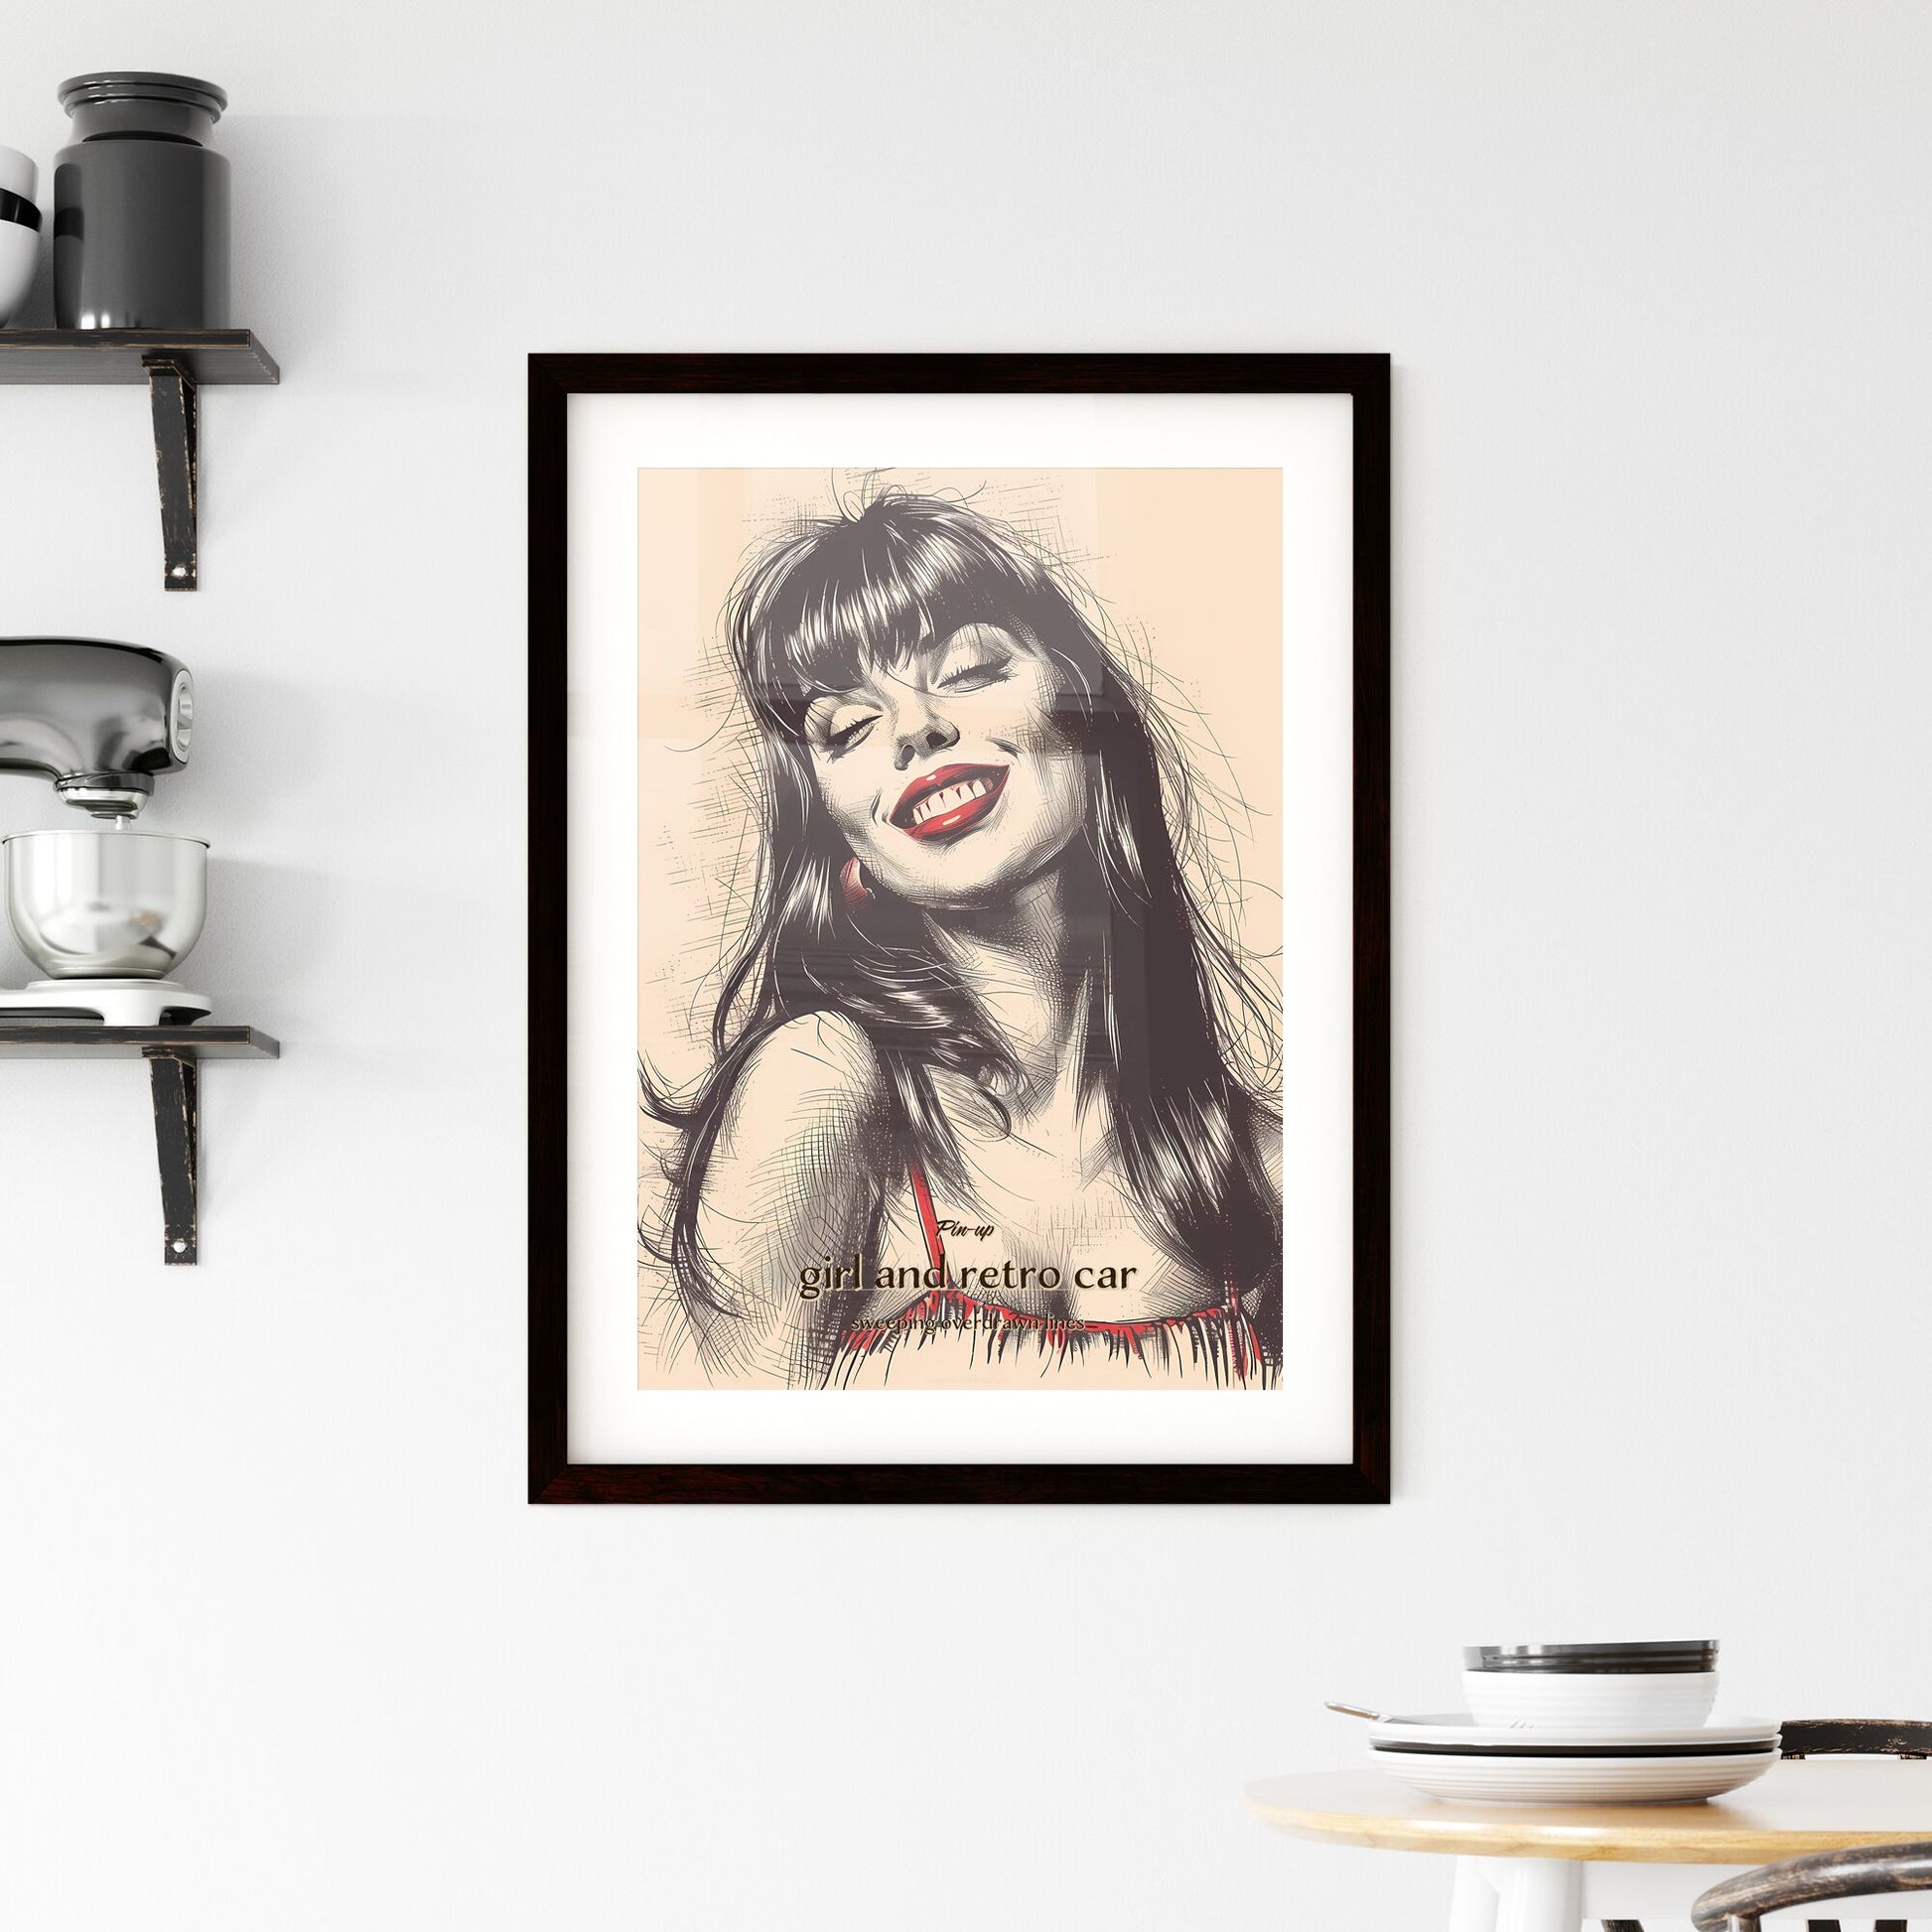 Pin-up, girl and retro car, sweeping overdrawn lines, A Poster of a woman with long hair and red lipstick smiling Default Title